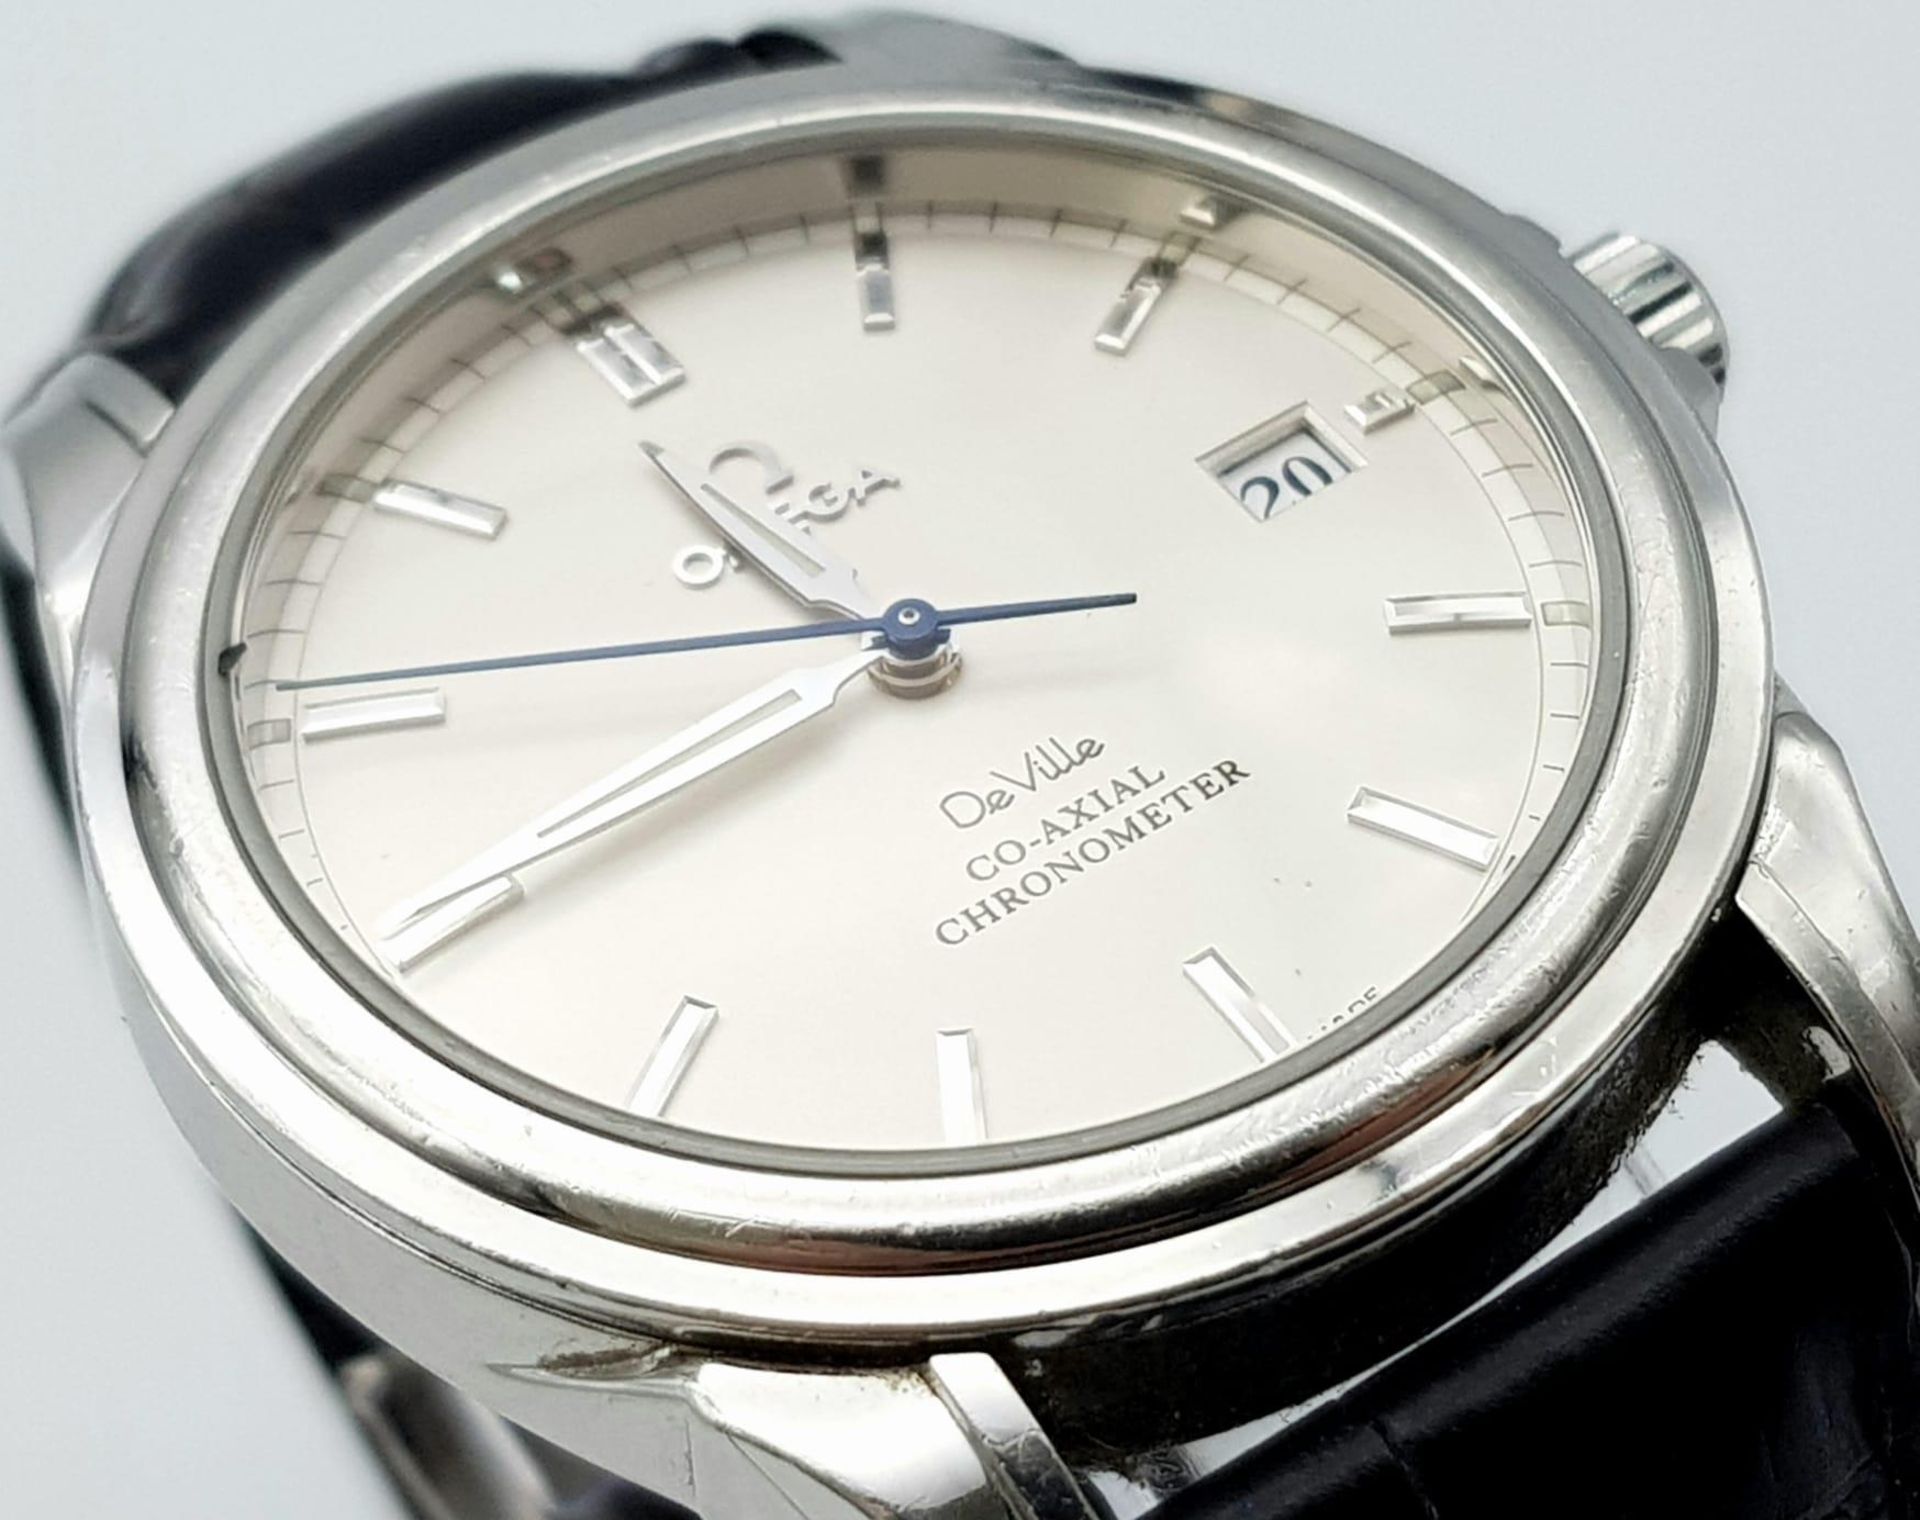 OMEGA DE VILLE CO AXIAL CHRONOMETER STAINLESS STEEL WATCH, WHITE FACE AND DIALS WITH BLACK LEATHER - Image 3 of 6